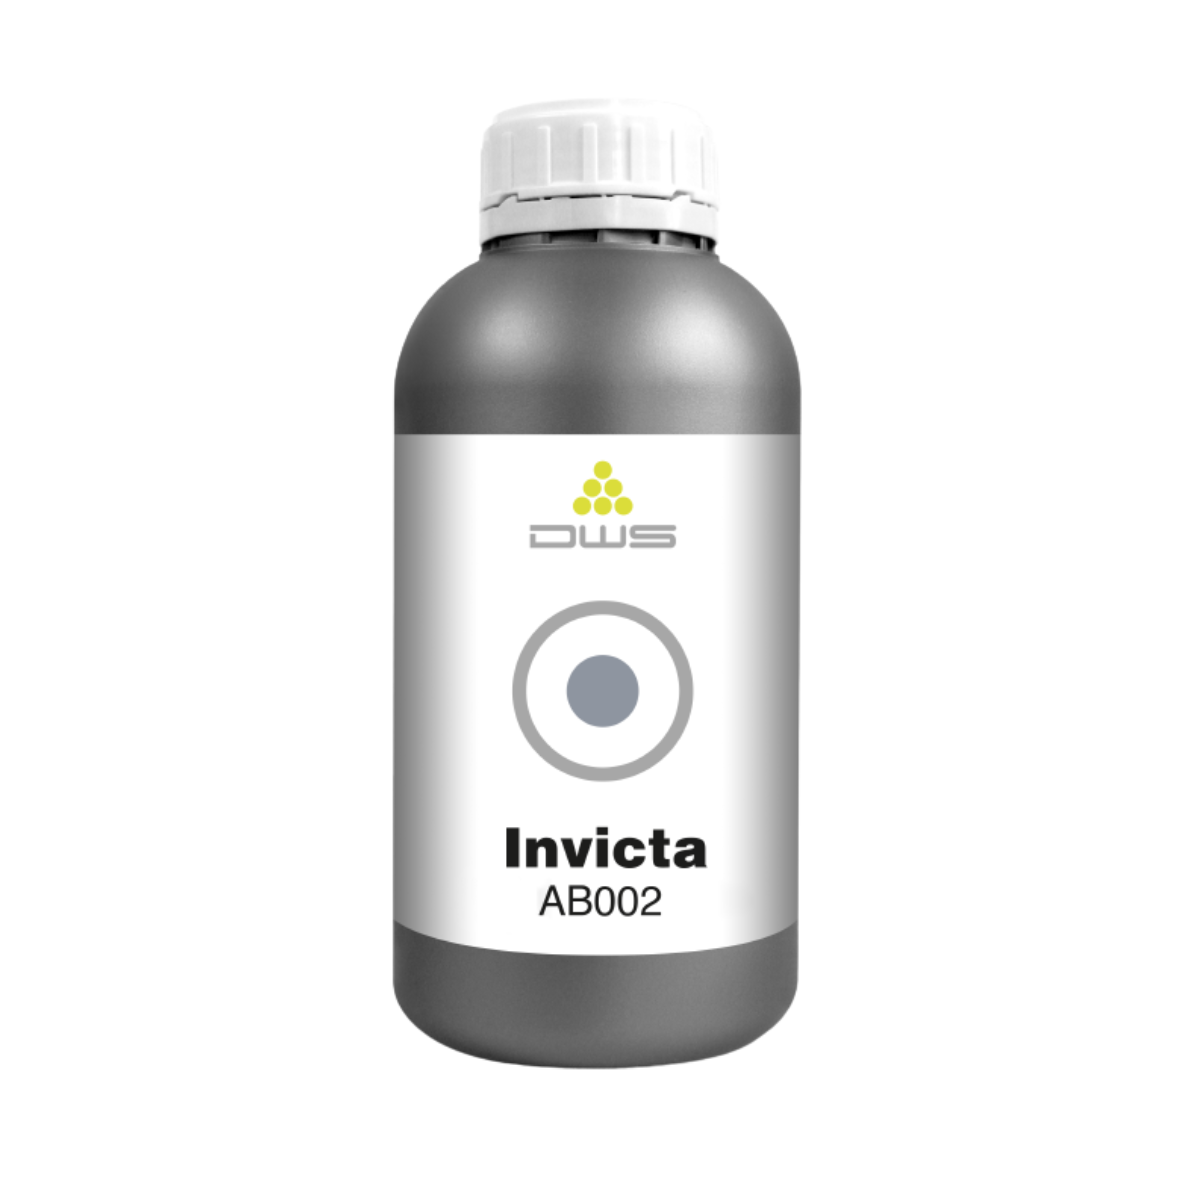 Invicta AB002 - 1kg Gris - 3dconsommables